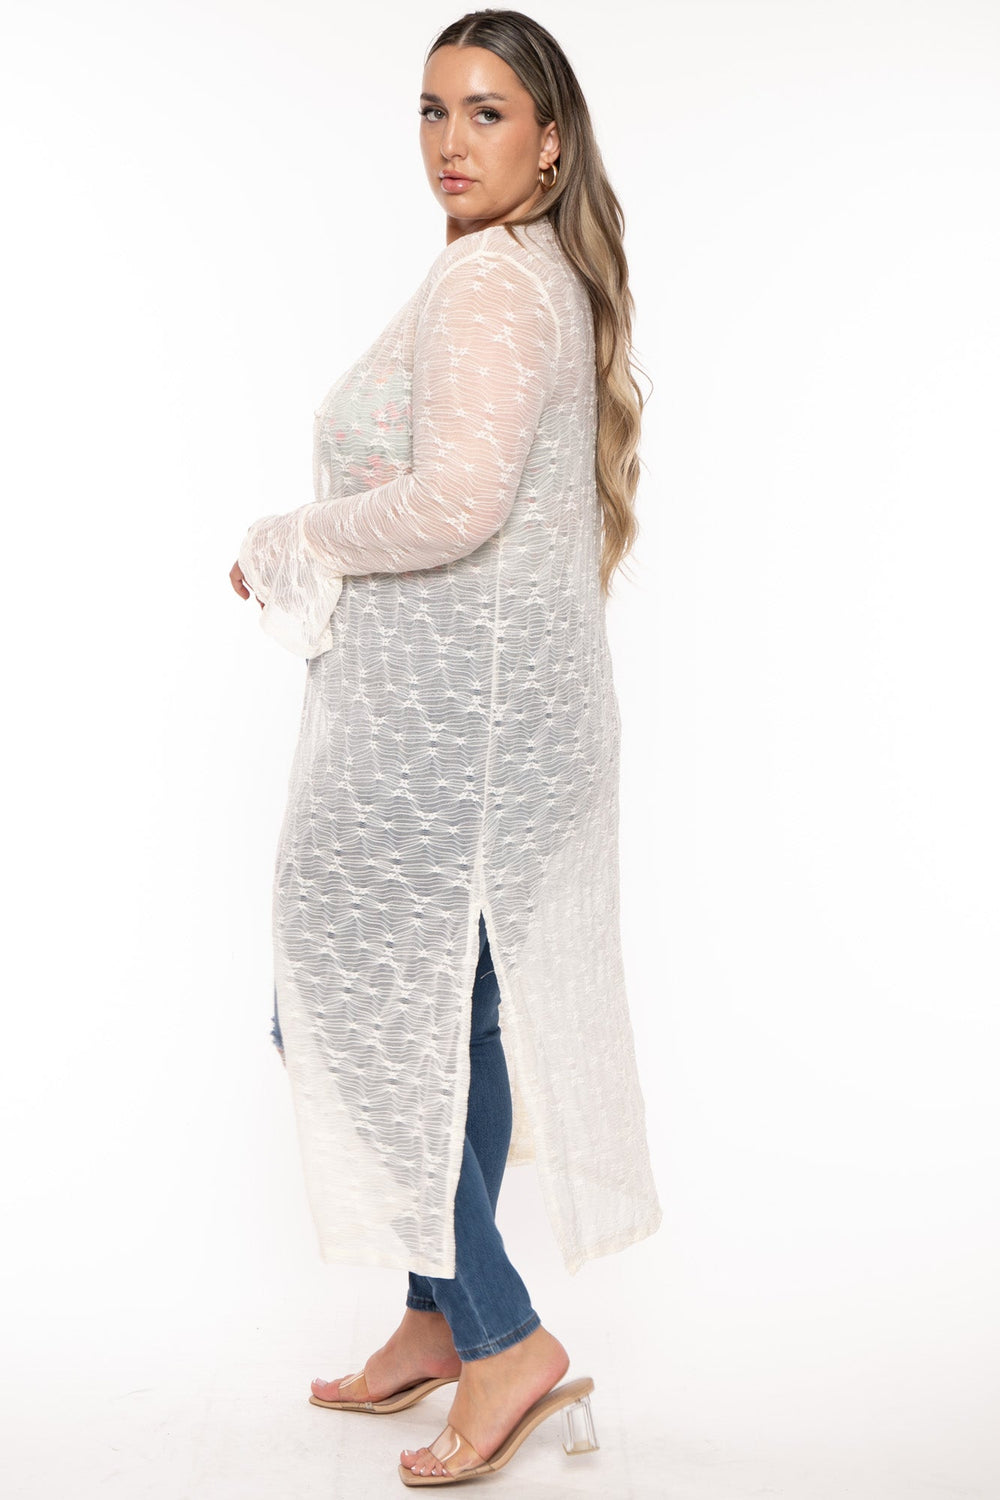 CULTURE CODE Tops Plus Size Scarlet Lace Flare Duster  - Ivory